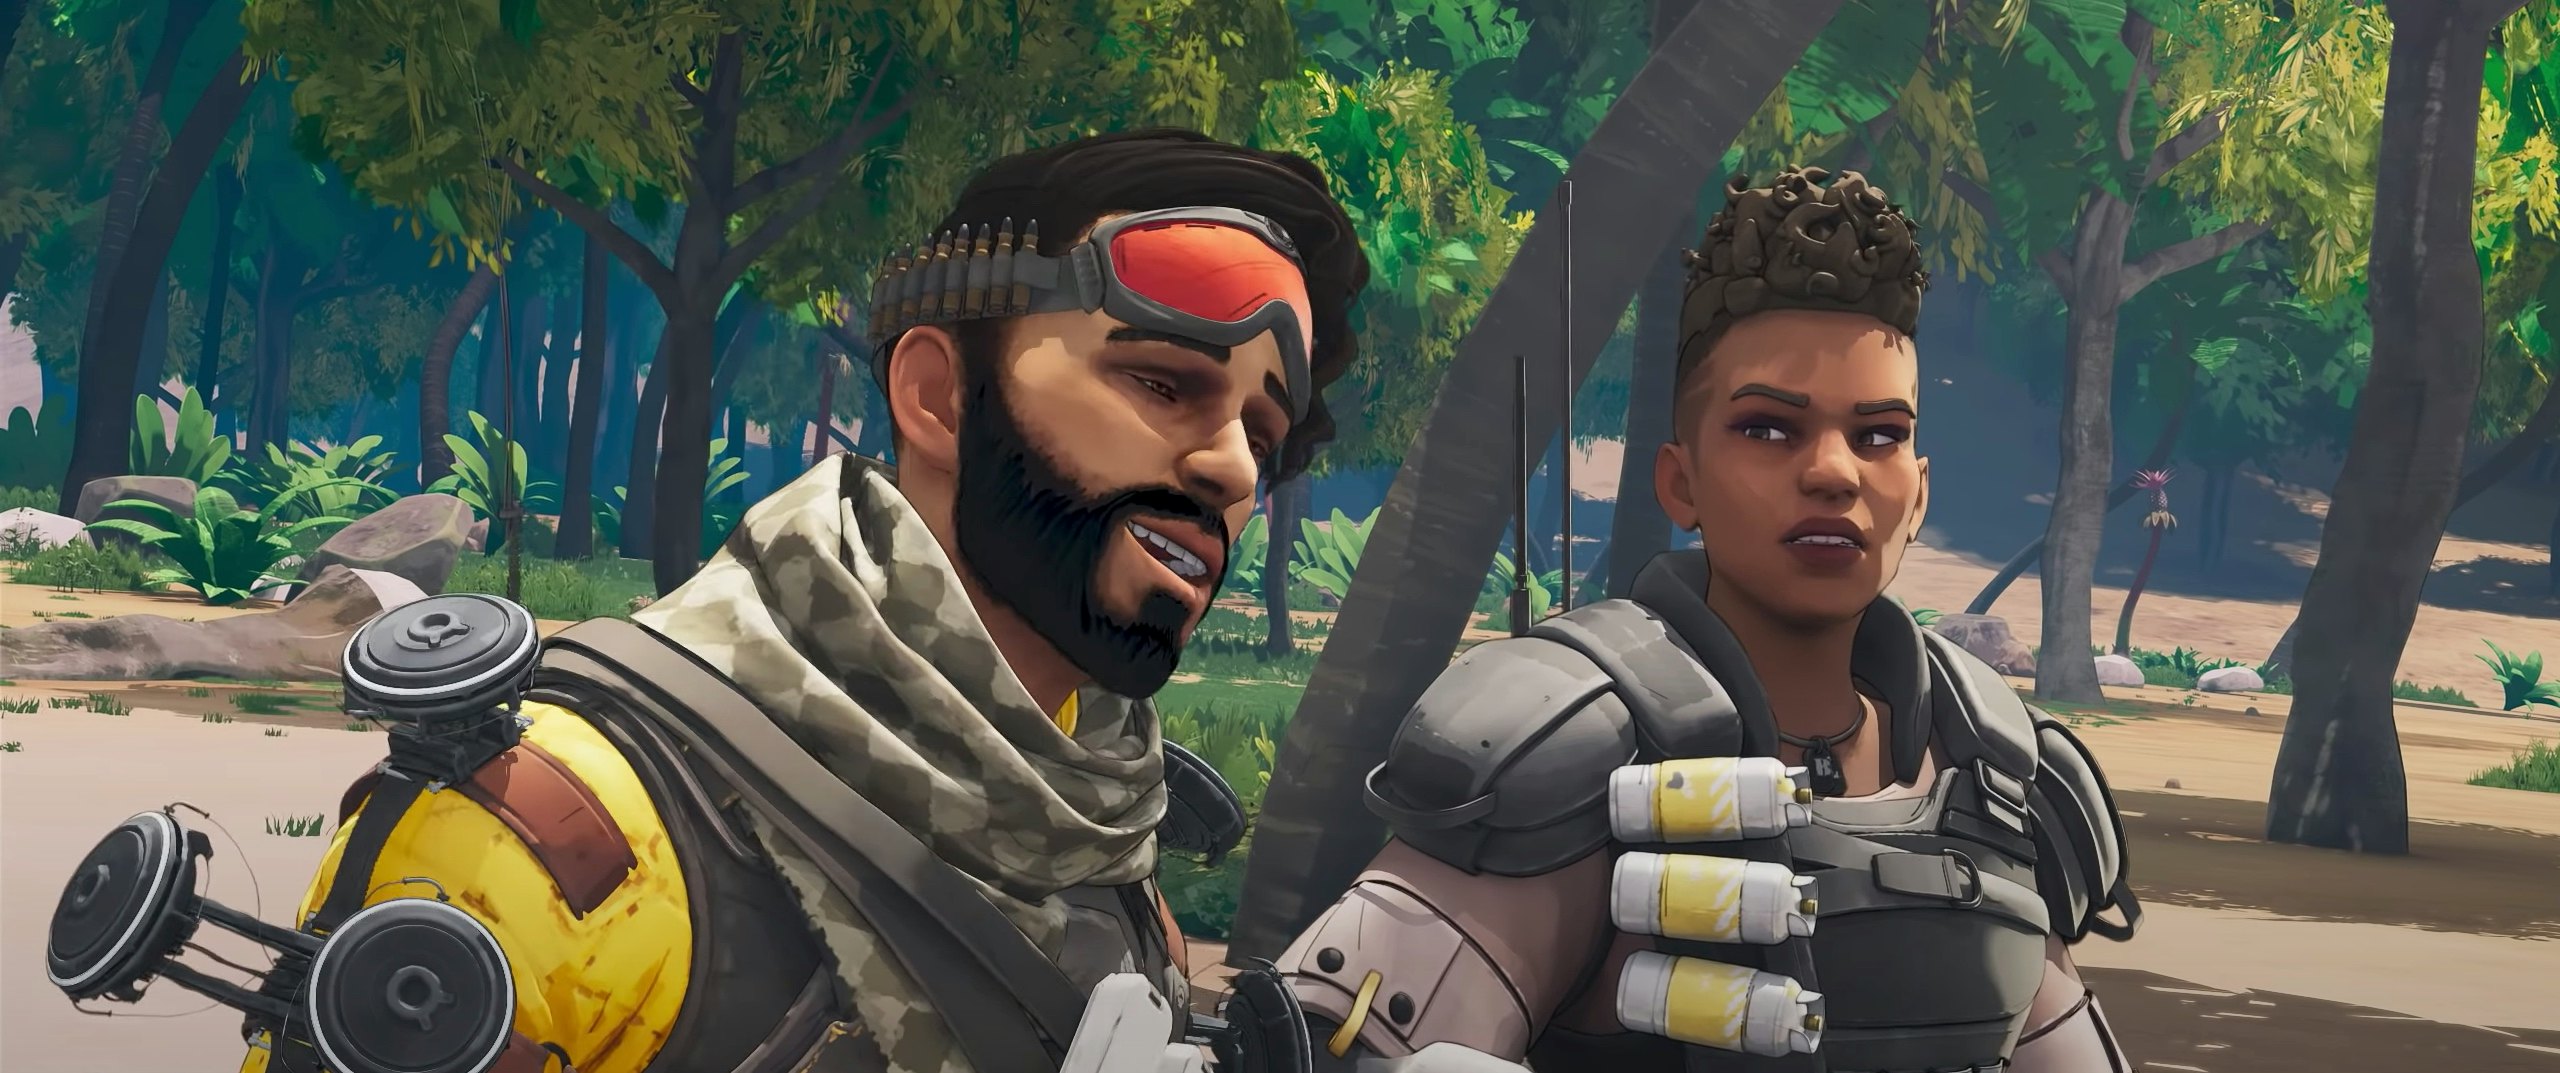 CONFIRMED* Apex Legends Season 10 Download Size: How Big Is The